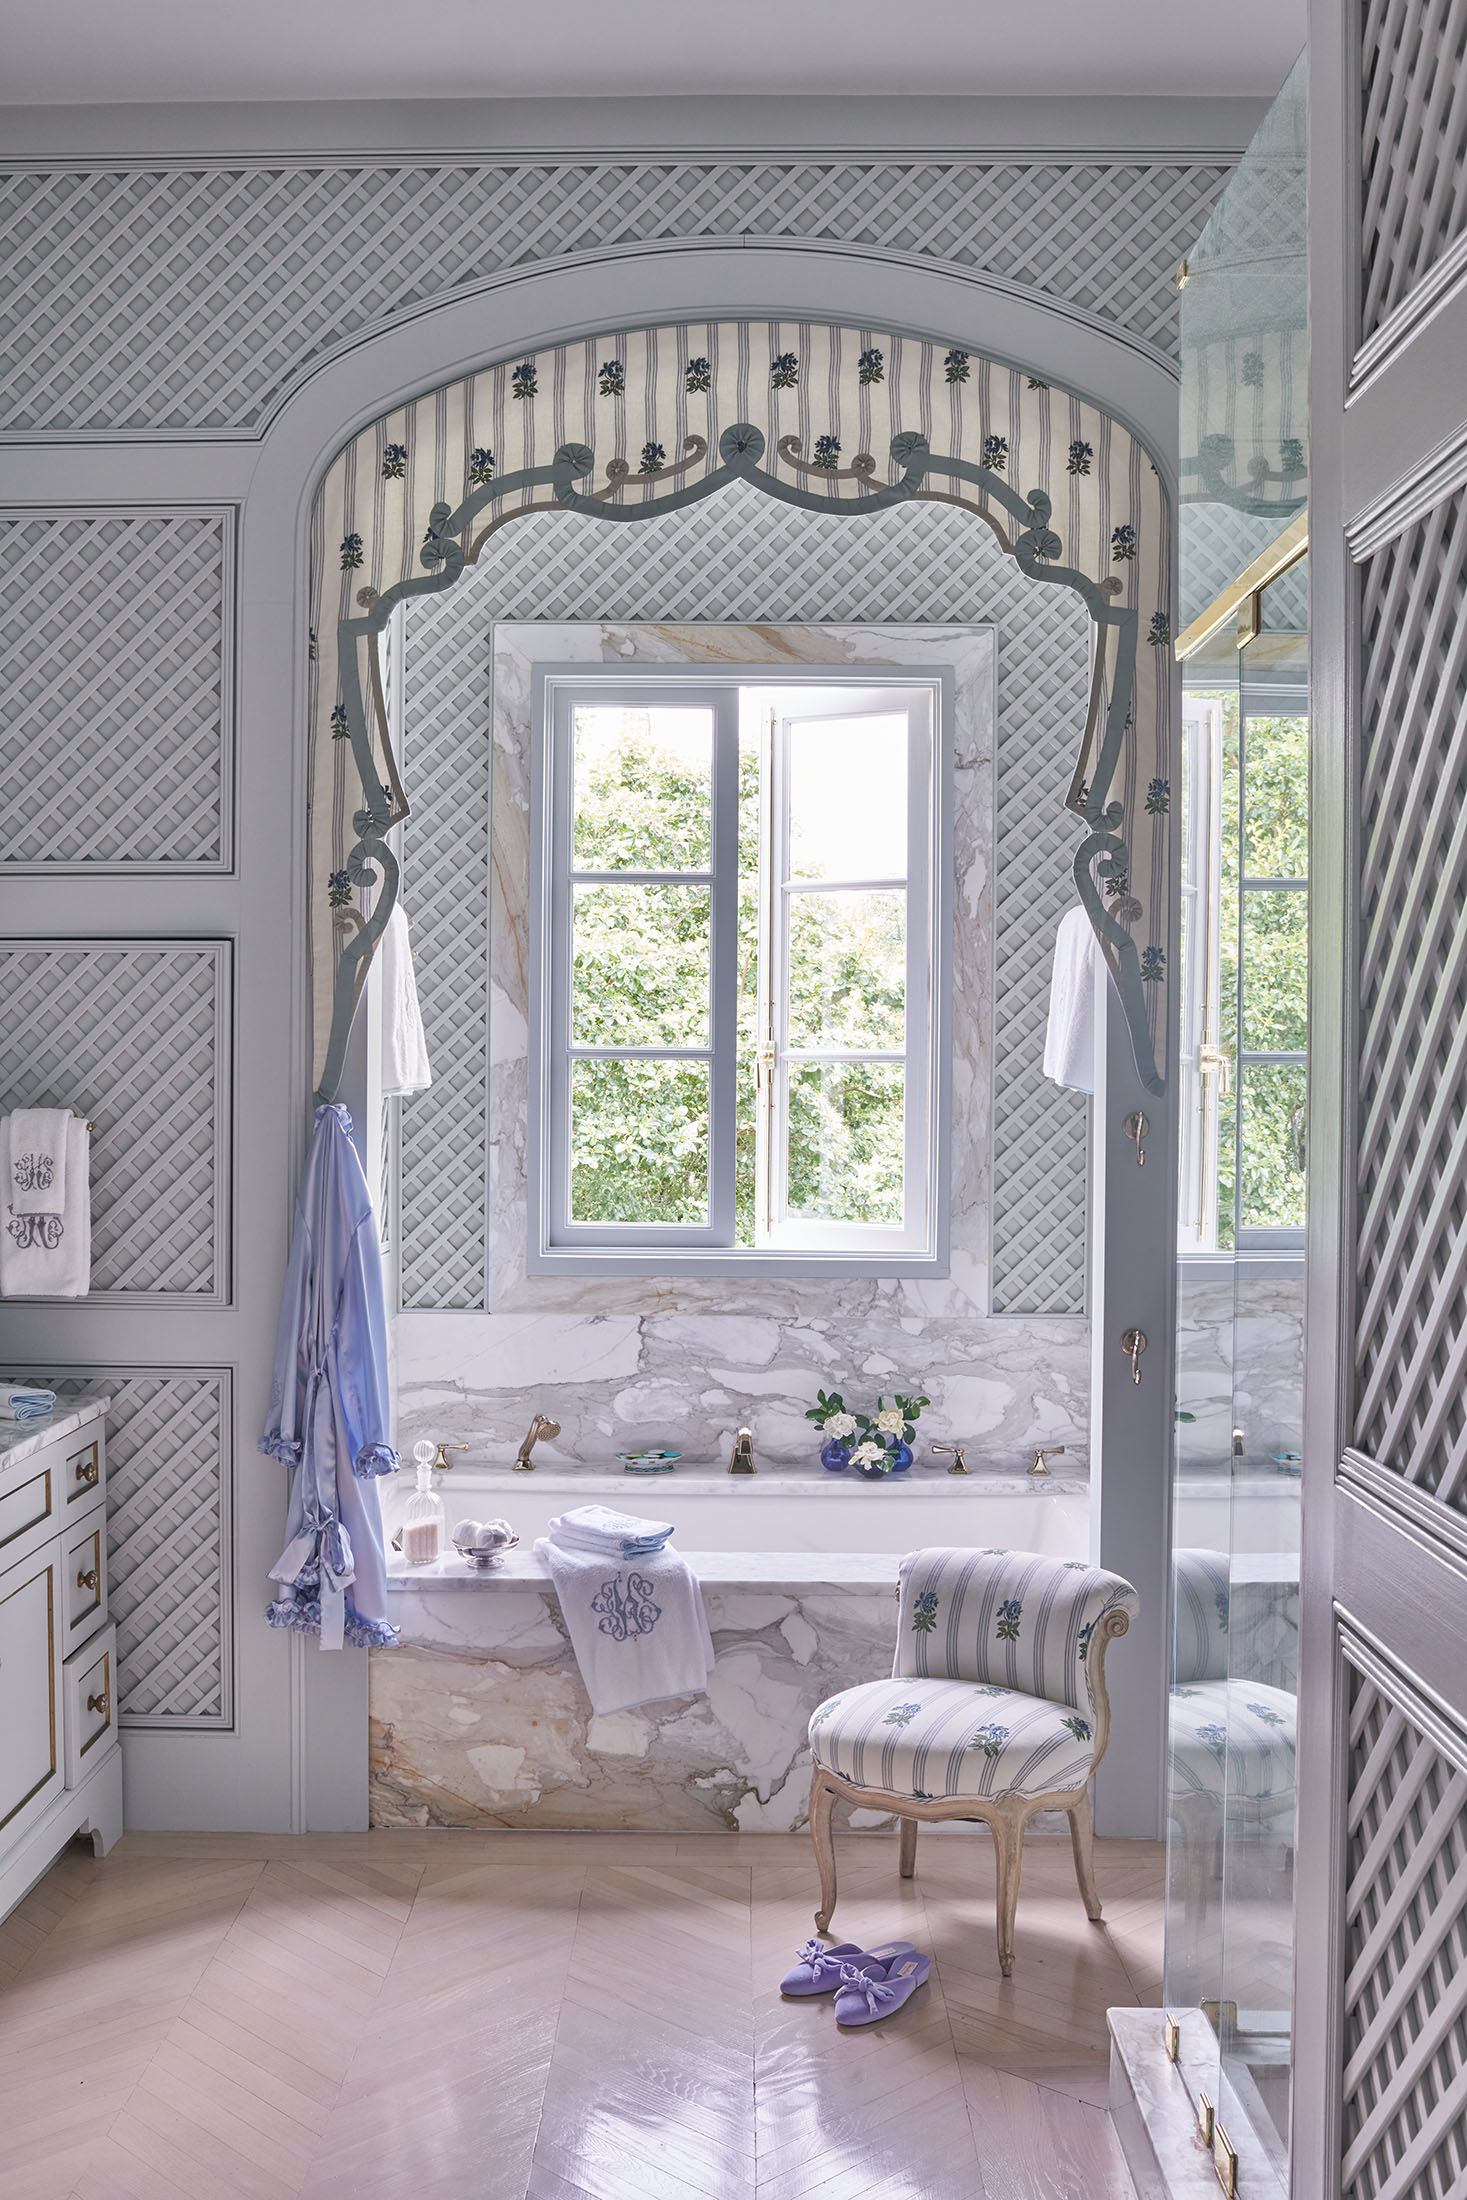 Bathtub in front of window of Jane Scott Hodges in New Orleans Home for Veranda Magazine by Alison Gootee Photography